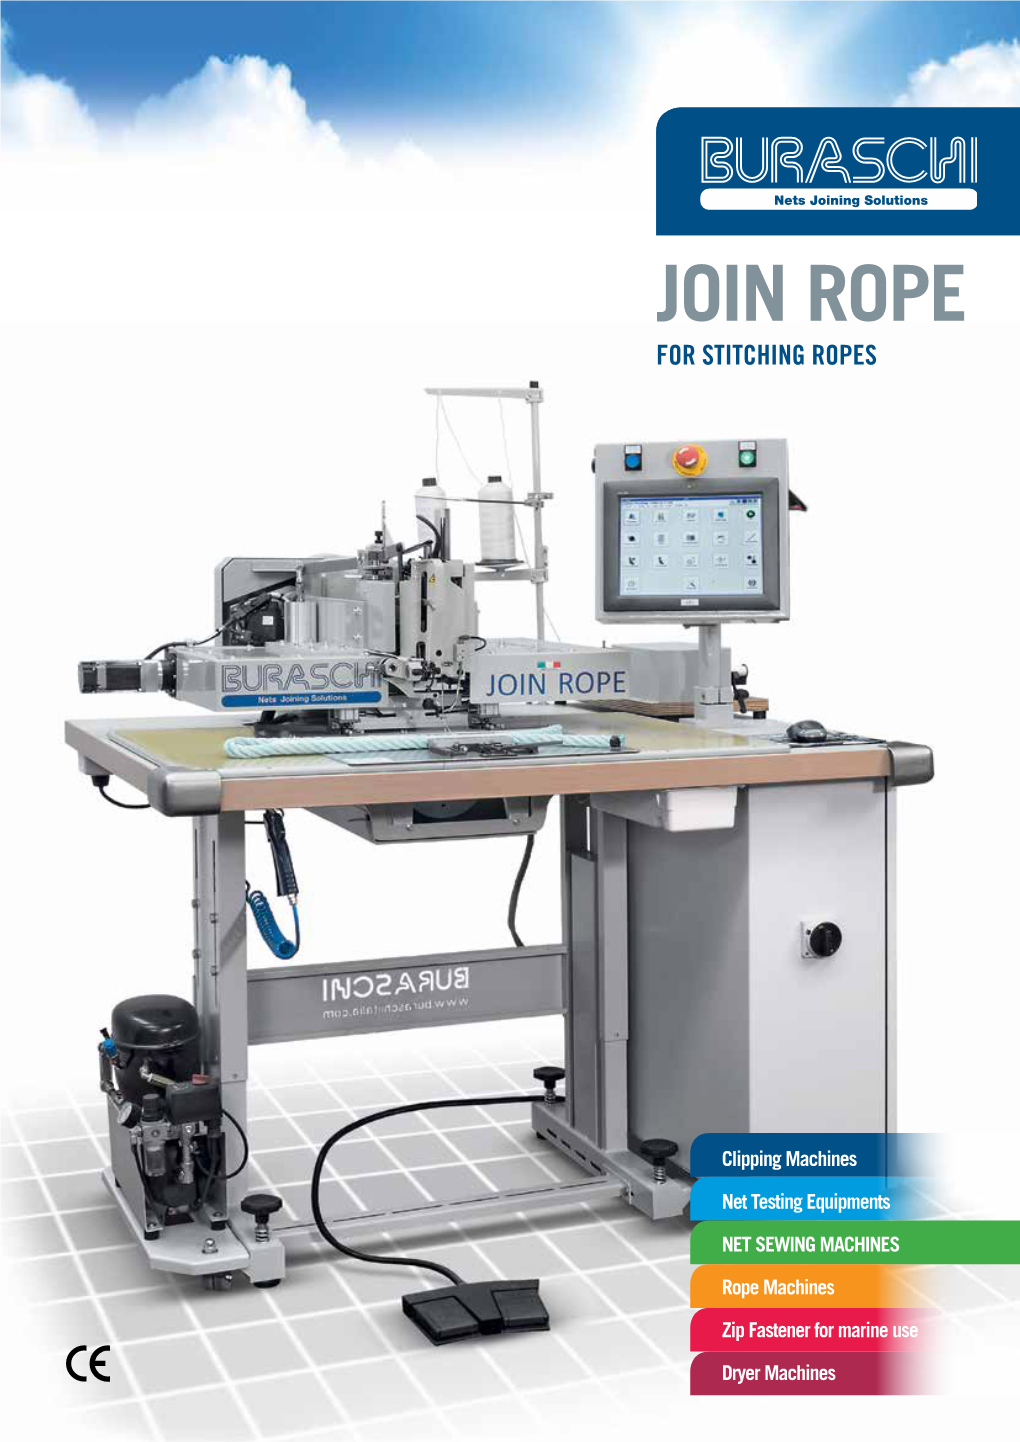 Join Rope for Stitching Ropes